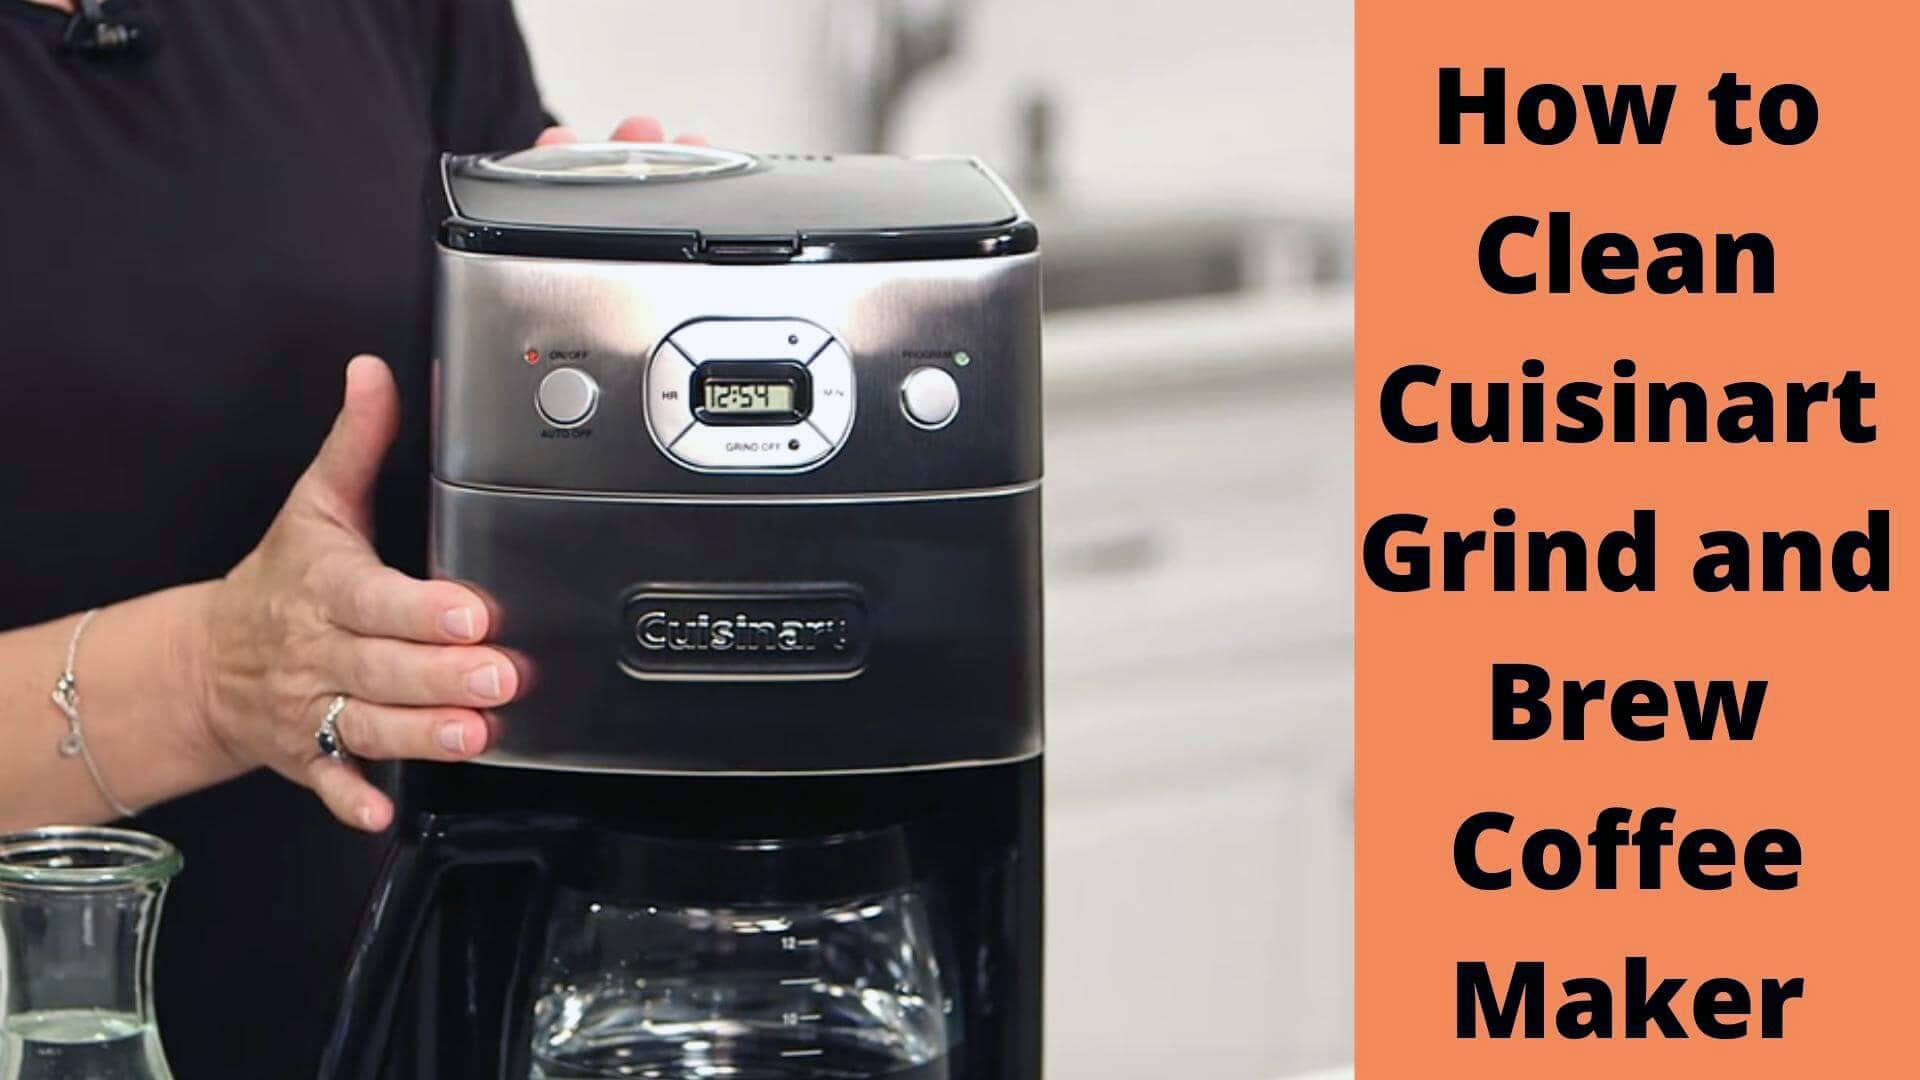 How to Clean Cuisinart Grind and Brew Coffee Maker